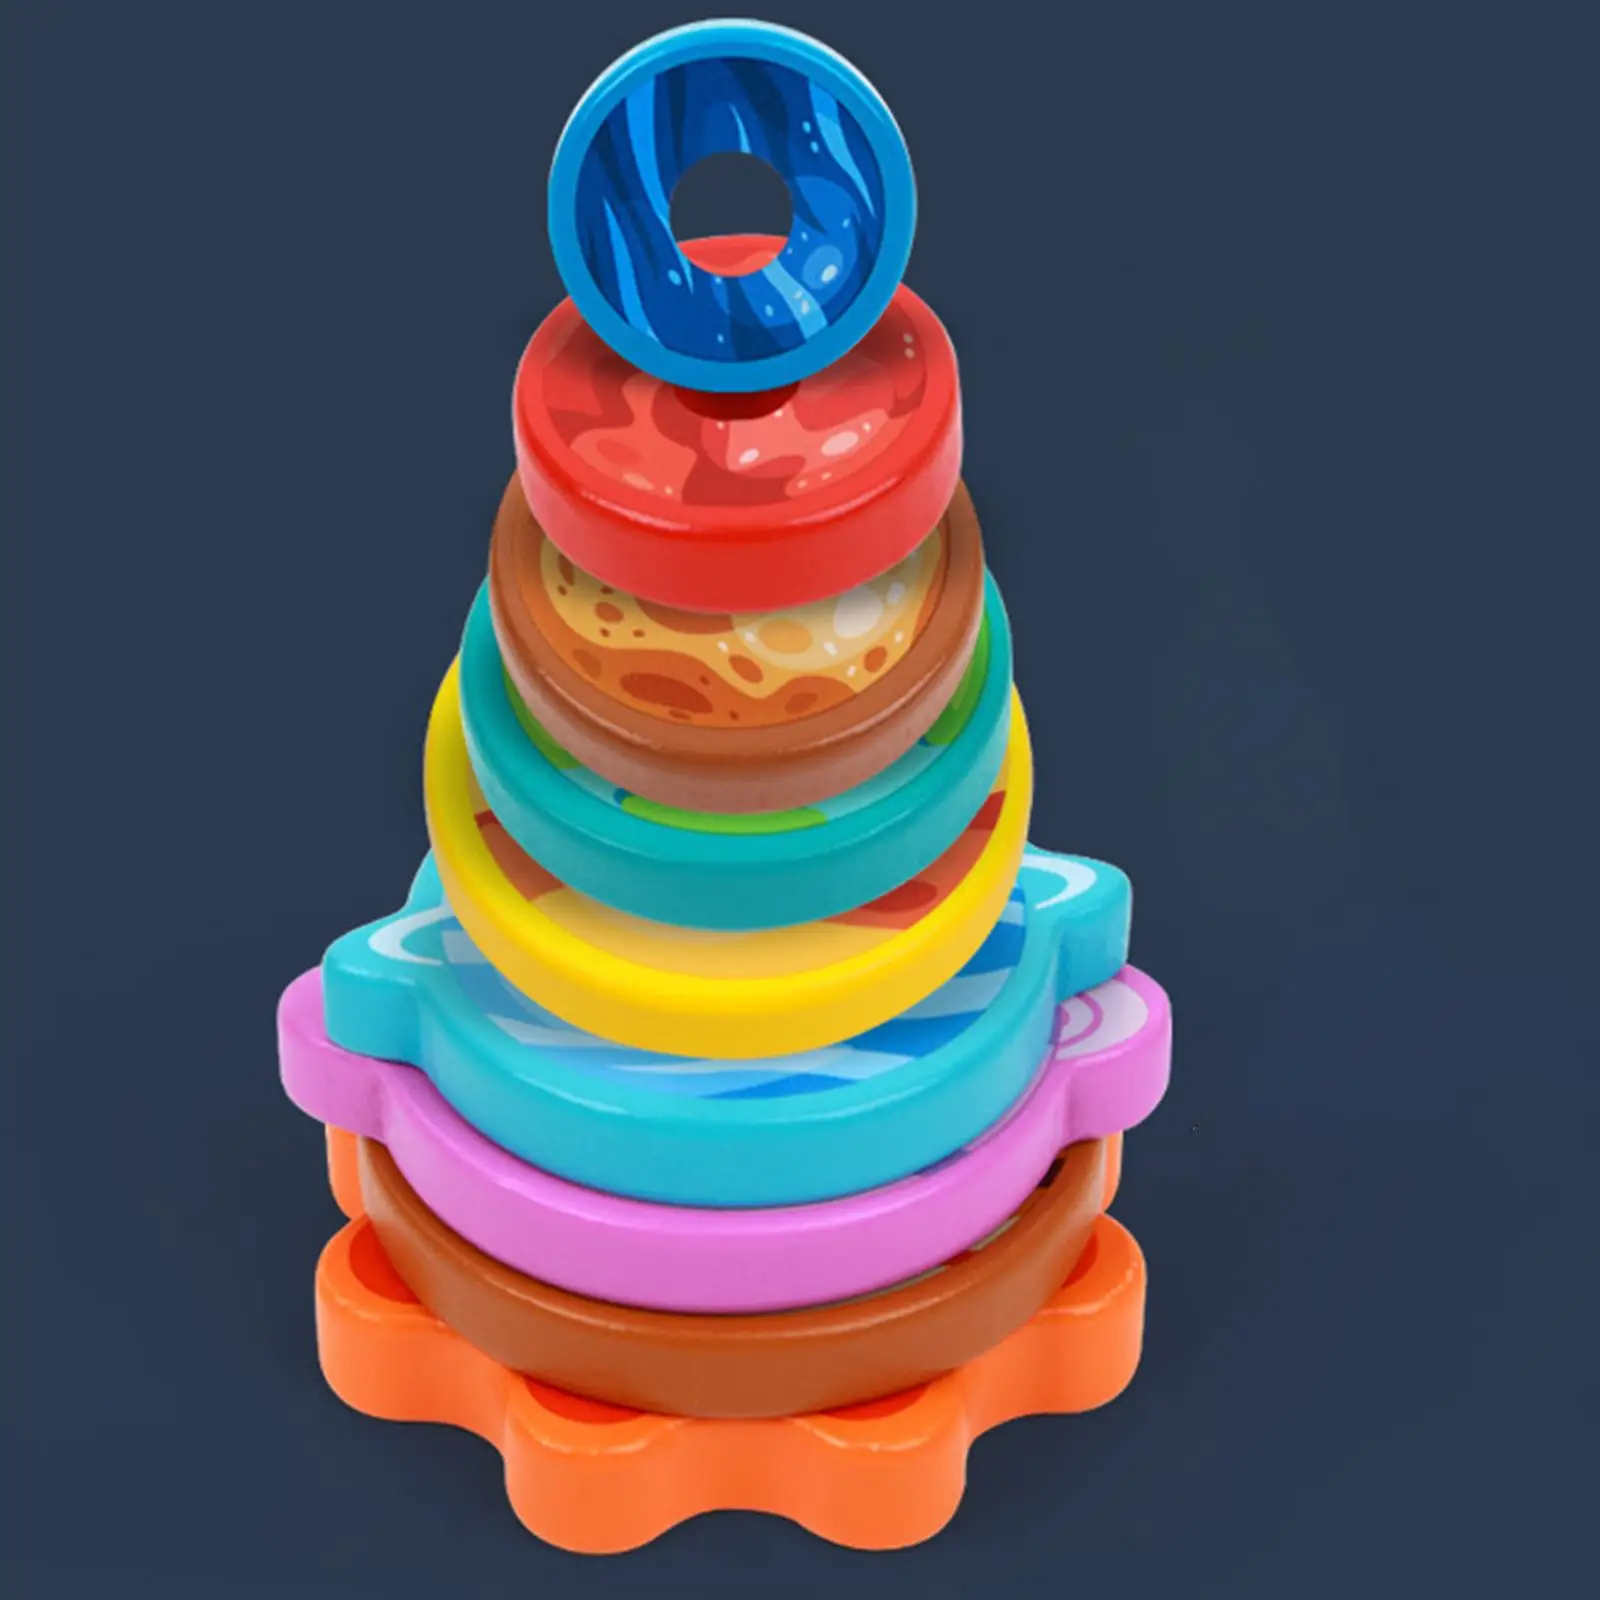 Rainbow Stacking Stacking Rings Stacking Toy for Toddlers Gifts